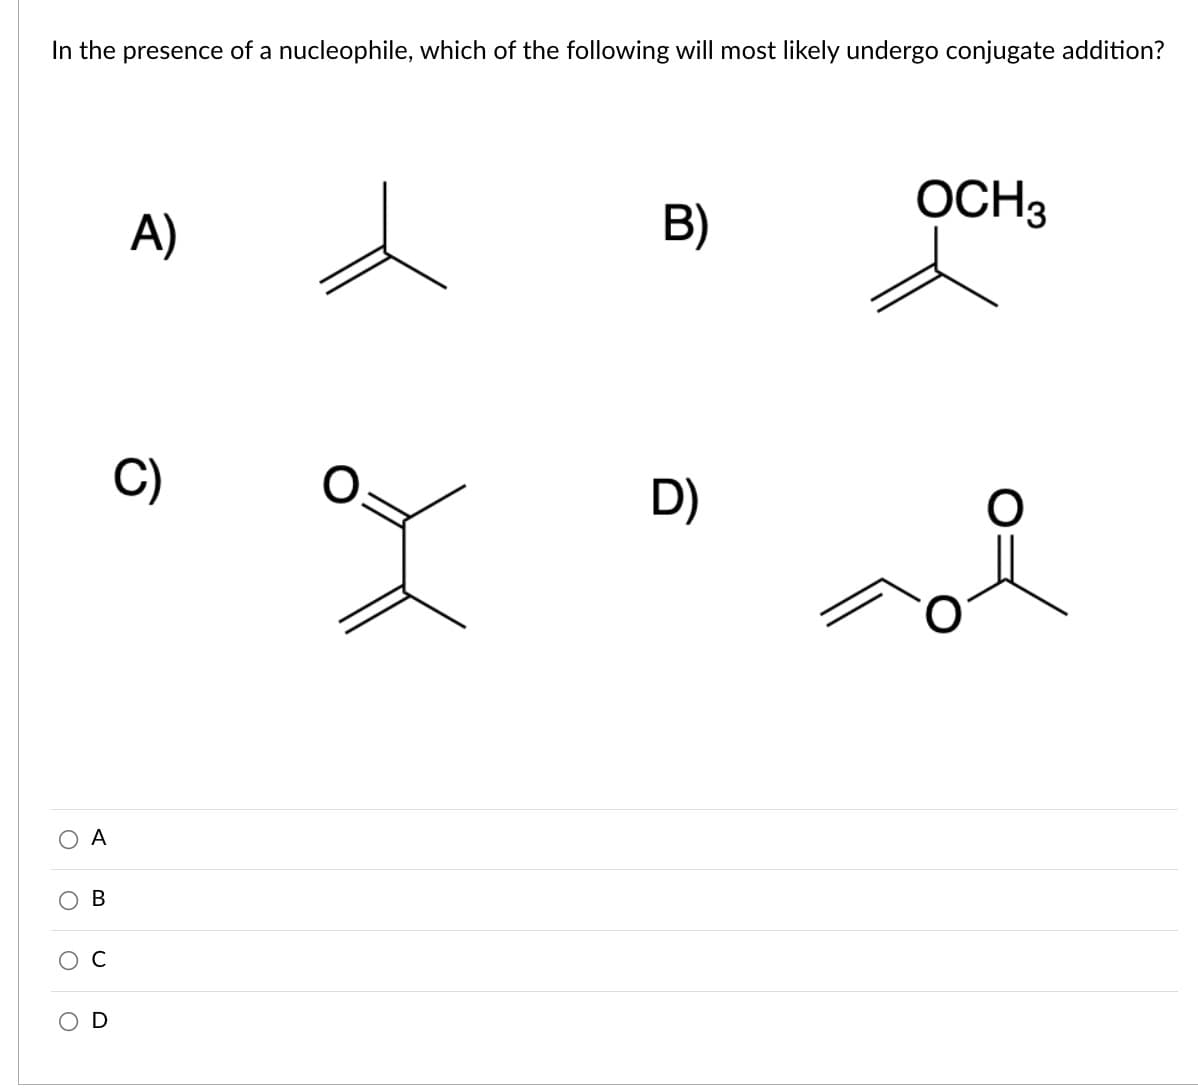 In the presence of a nucleophile, which of the following will most likely undergo conjugate addition?
B)
OCH3
A)
D)
O A
ов
C
OD
